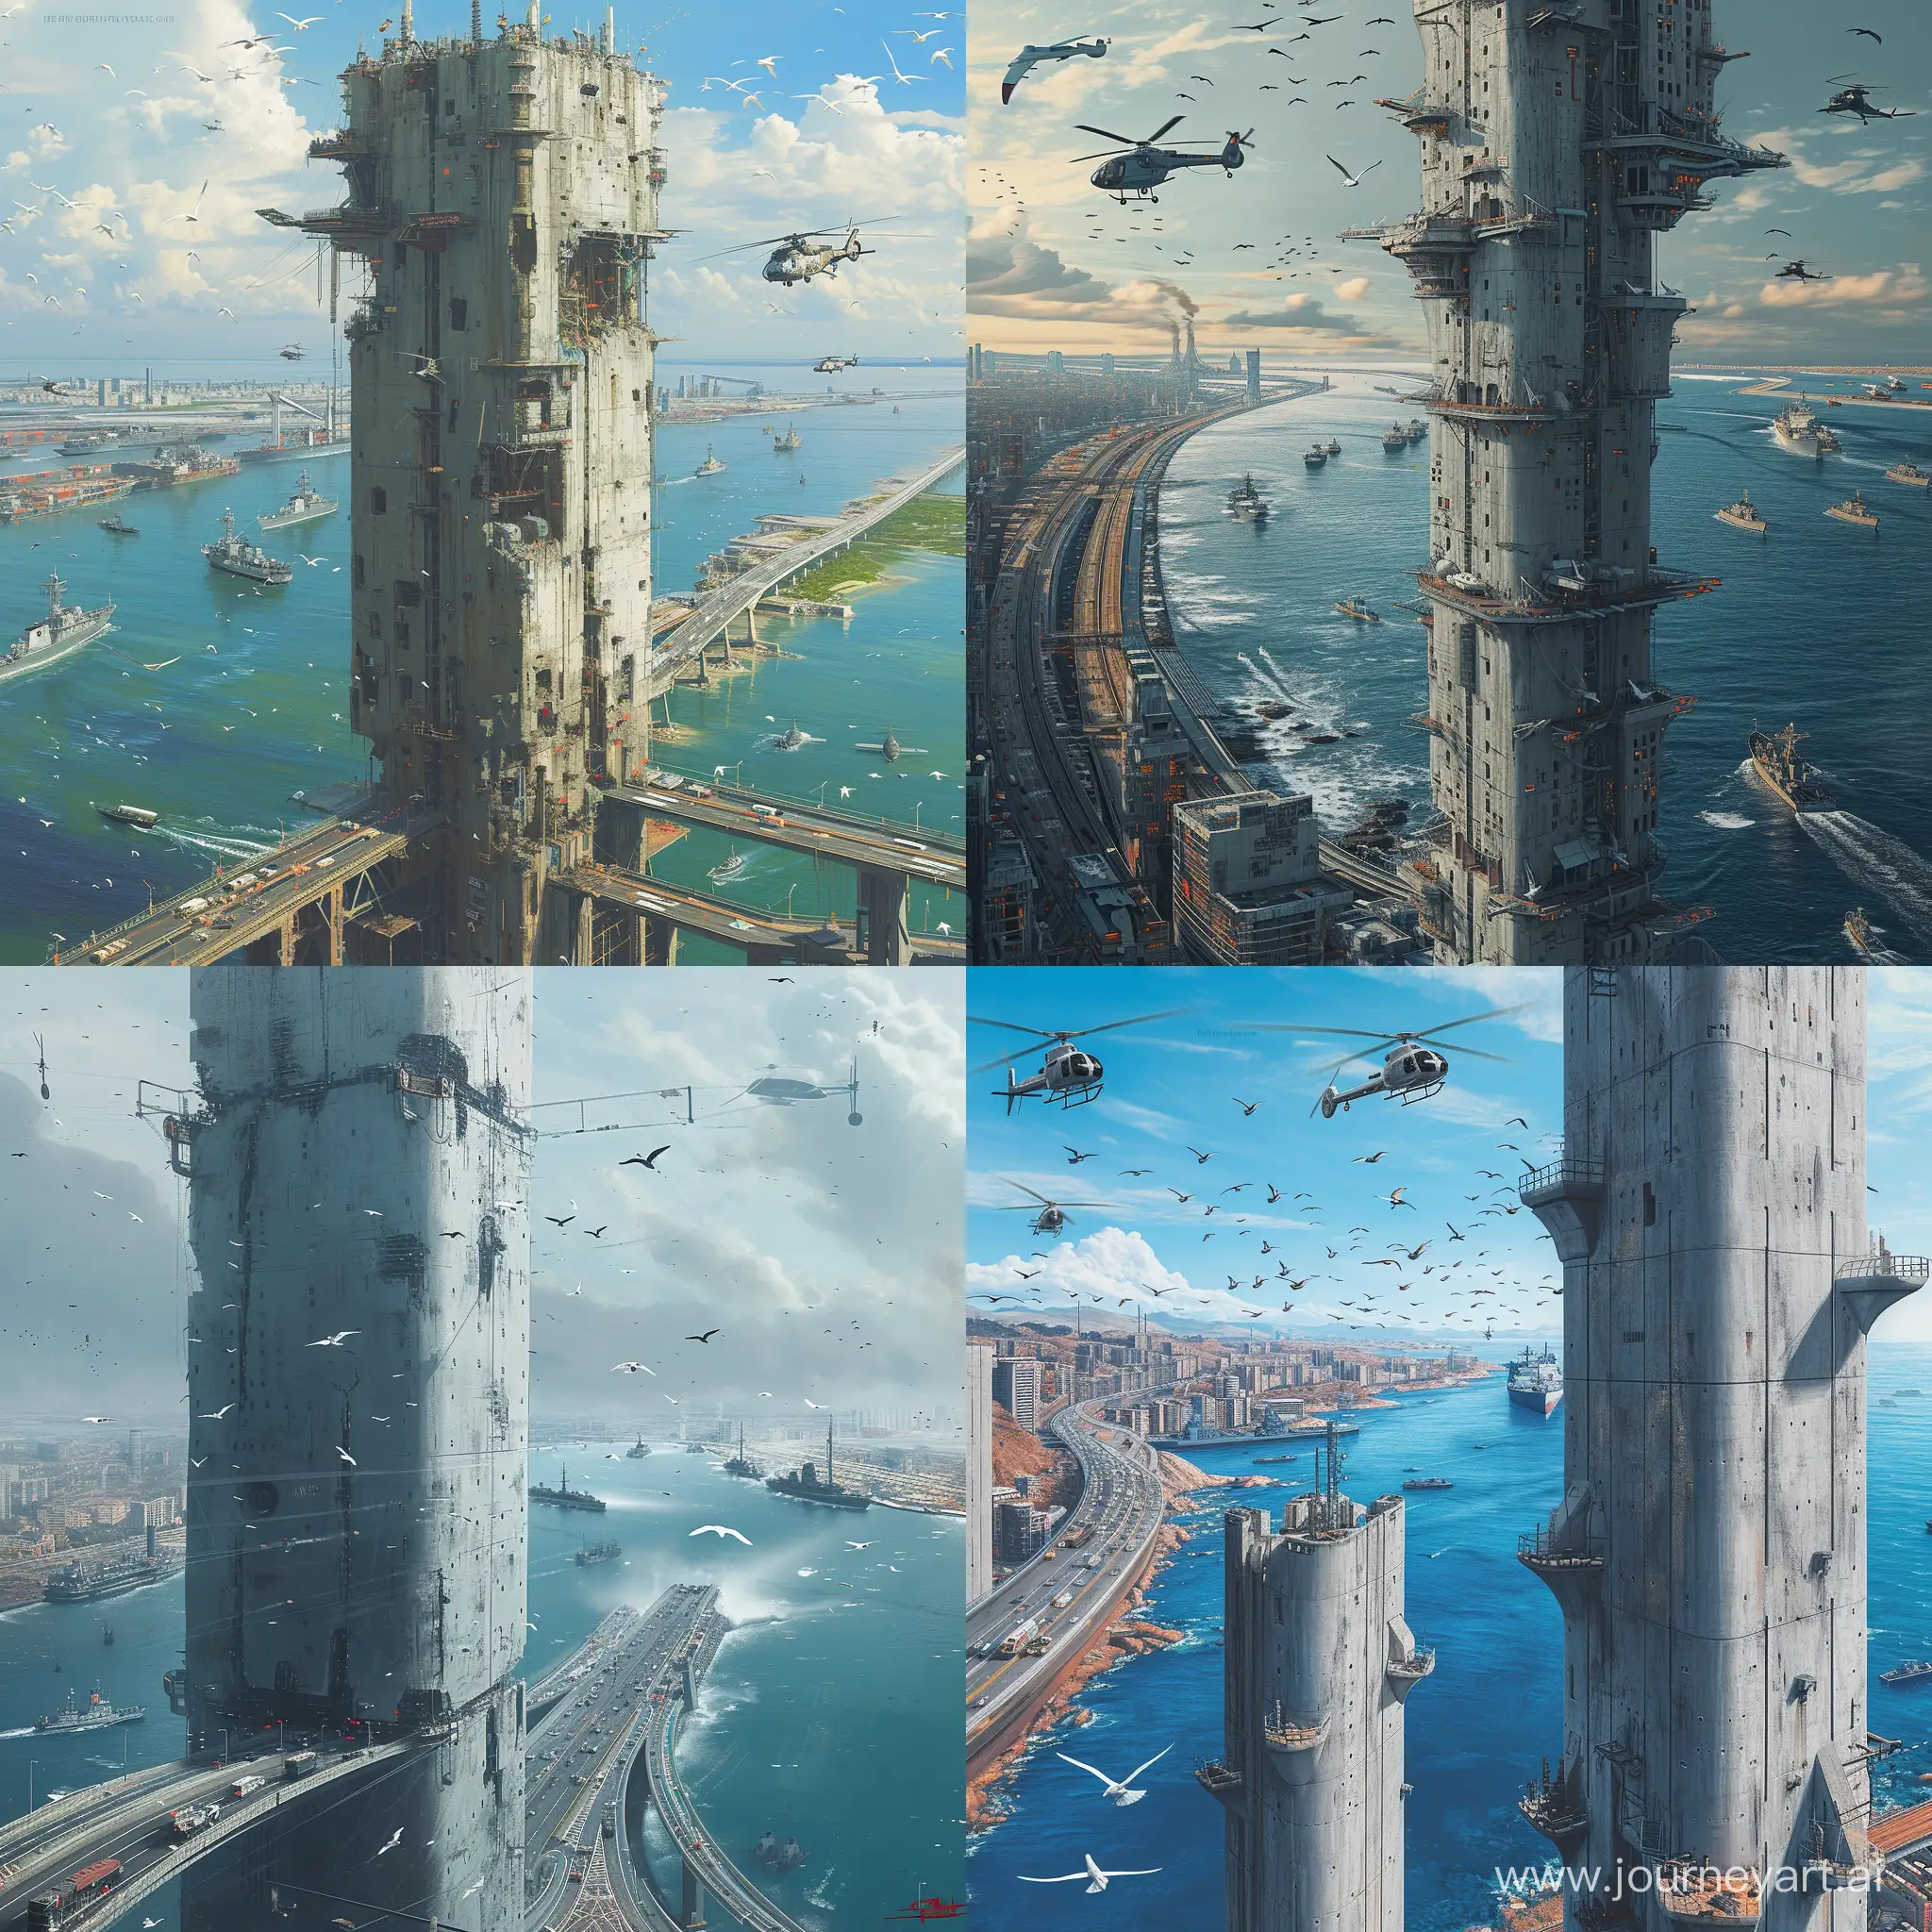 Concrete tower city, city on water, highways, cyberpunk, seagulls, sea, beautiful sea, huge panorama, very detailed, helicopters, city panorama, warships in the background, ships, digital drawing, paint drawing, oil painting